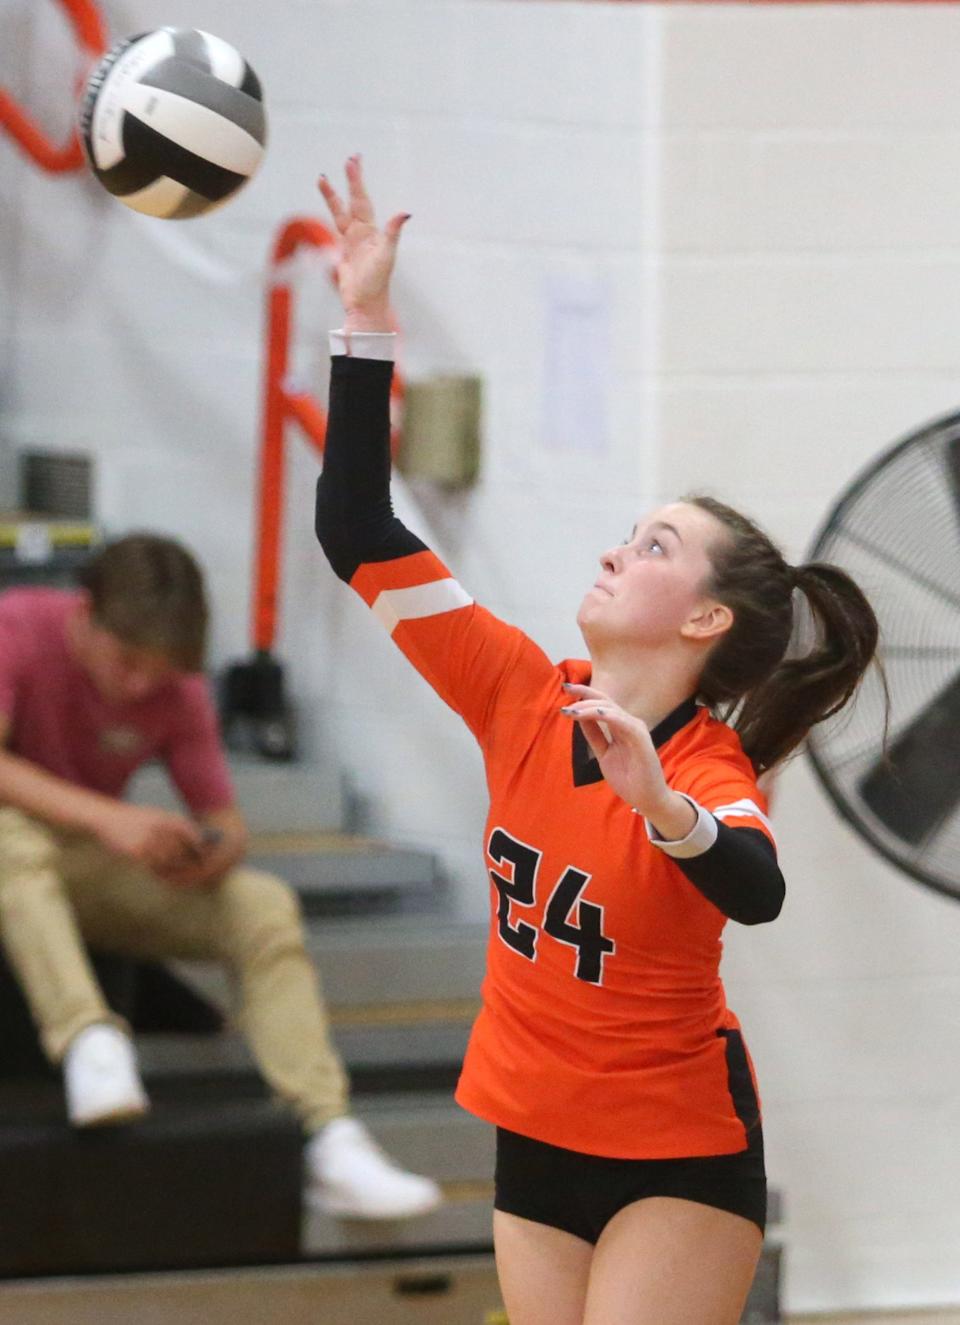 Janelle Swisher, serving at Hoover a year ago, served 10 straight points Wednesday for Marlington, in addition to breaking the school's single-season record for assists.